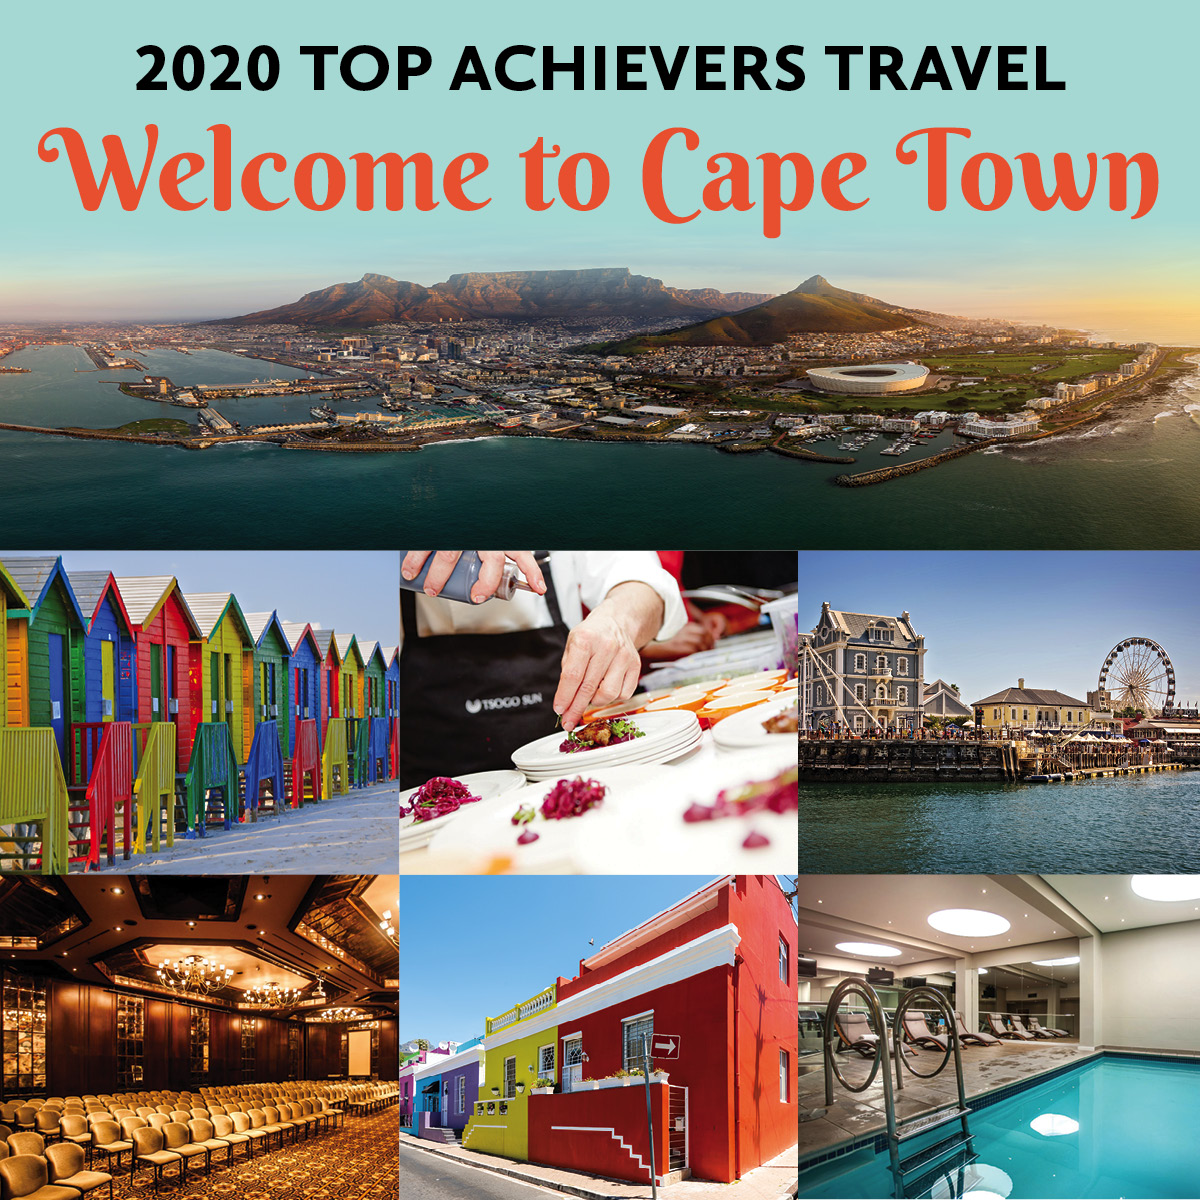 Images of Cape Town